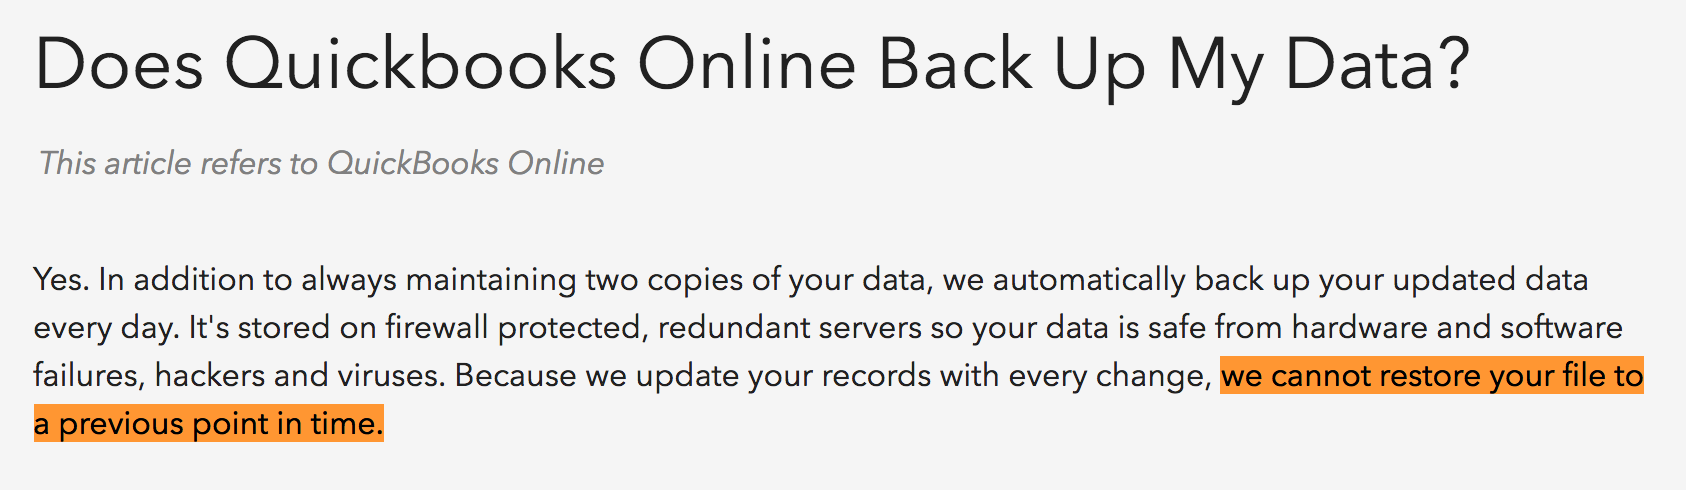 Does QuickBooks Online Back Up My Data?